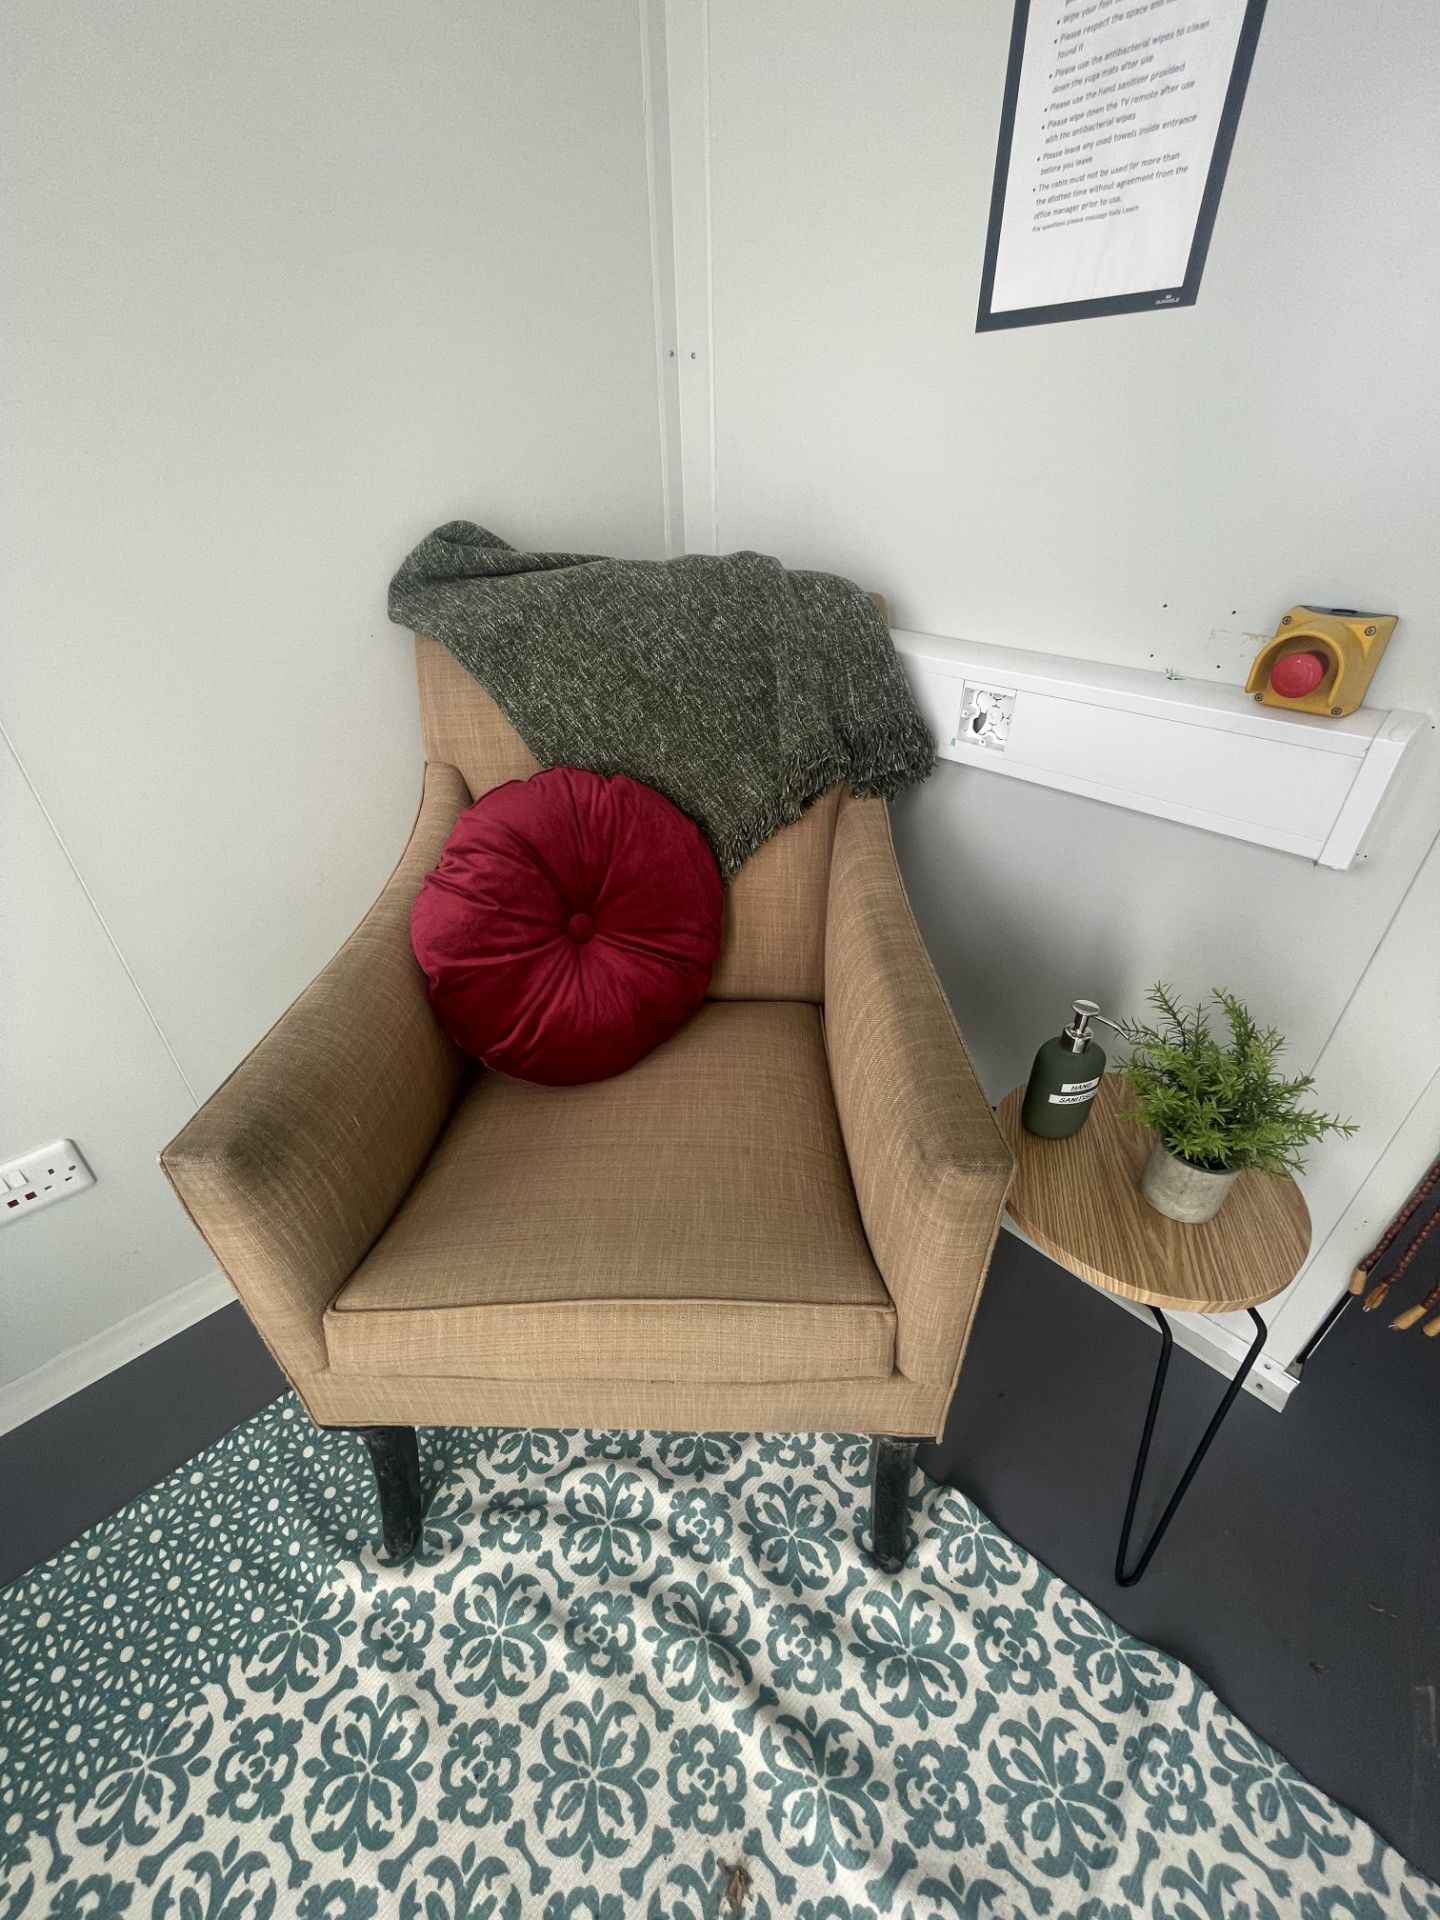 Wellbeing cabin with furniture contents - Image 2 of 11